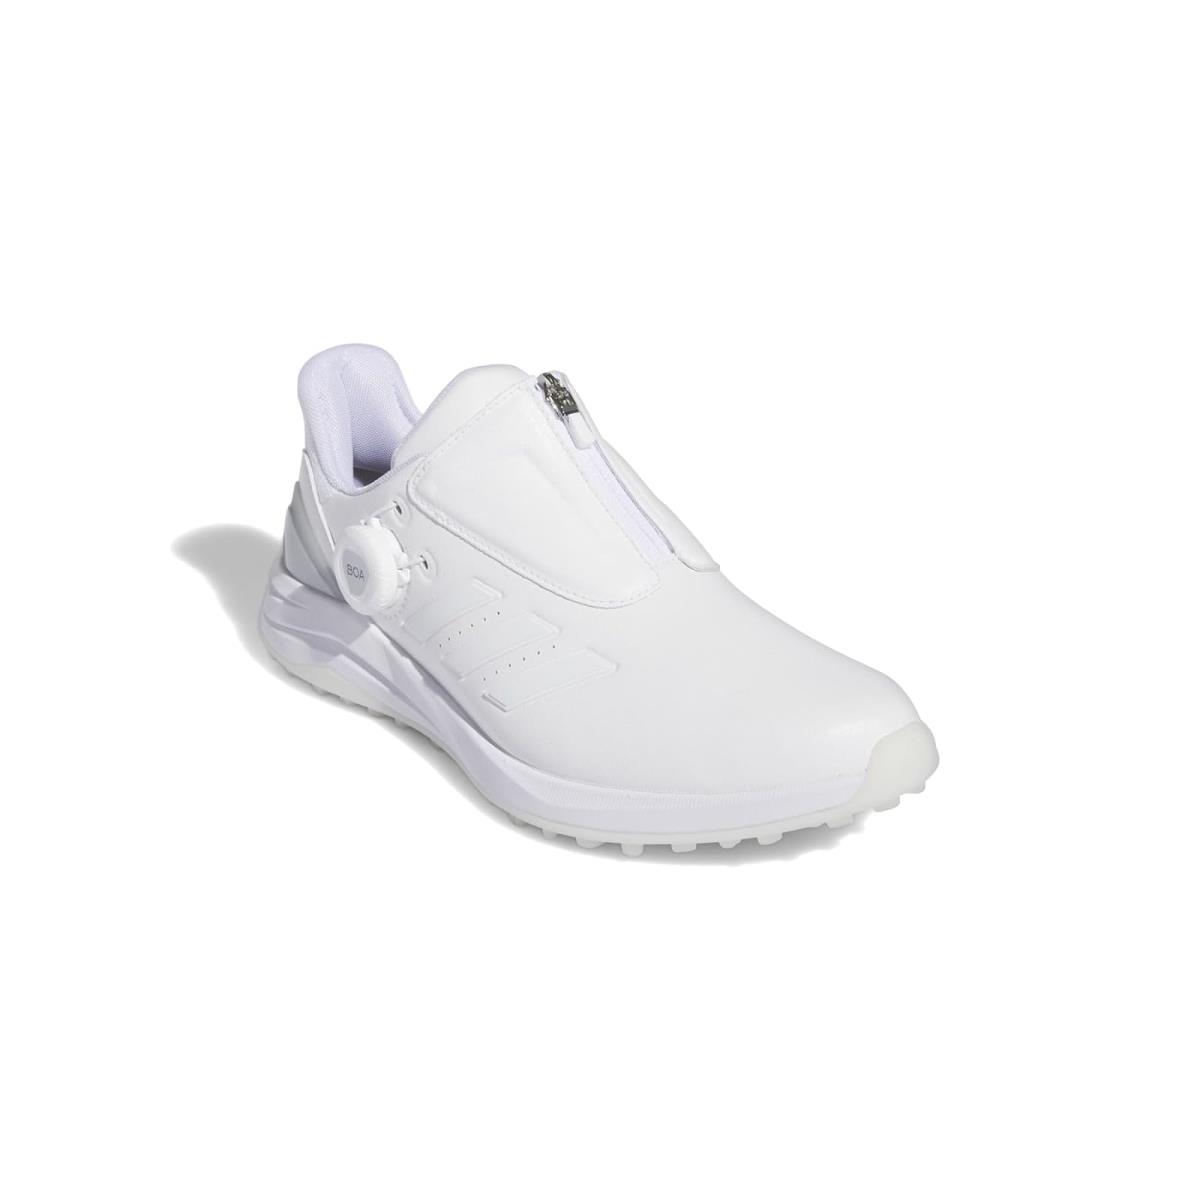 Woman`s Sneakers Athletic Shoes Adidas Golf Solarmotion Boa 24 Footwear White/Footwear White/Silvermet